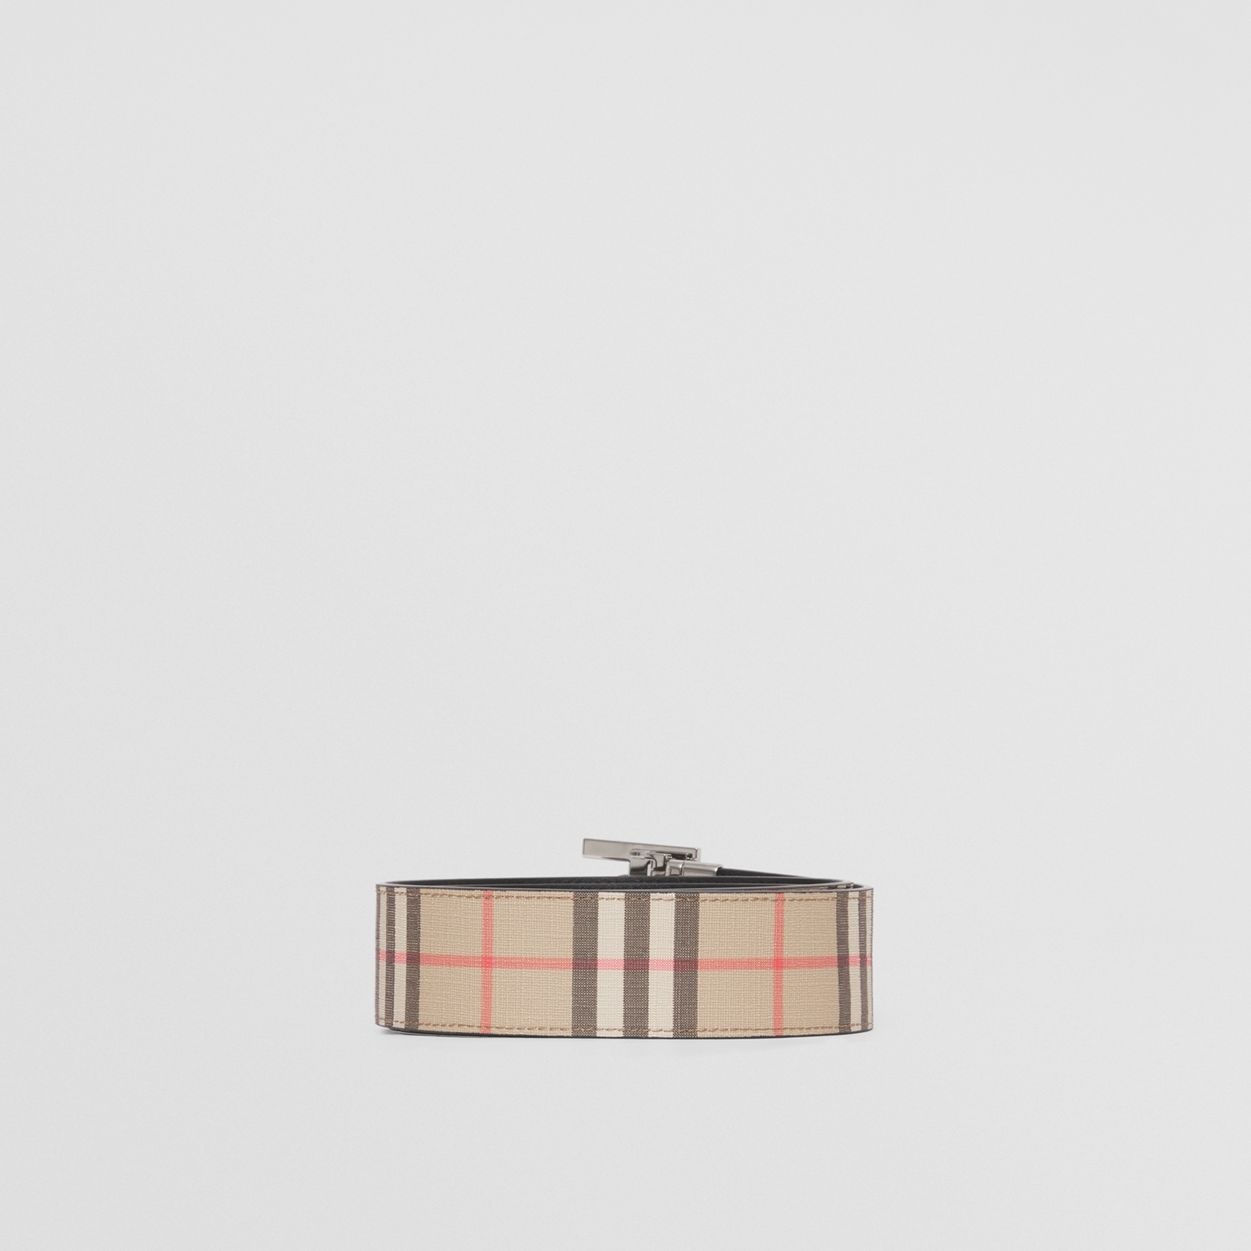 Burberry Burberry REVERSIBLE VINTAGE CHECK AND LEATHER TB Belt - Stylemyle